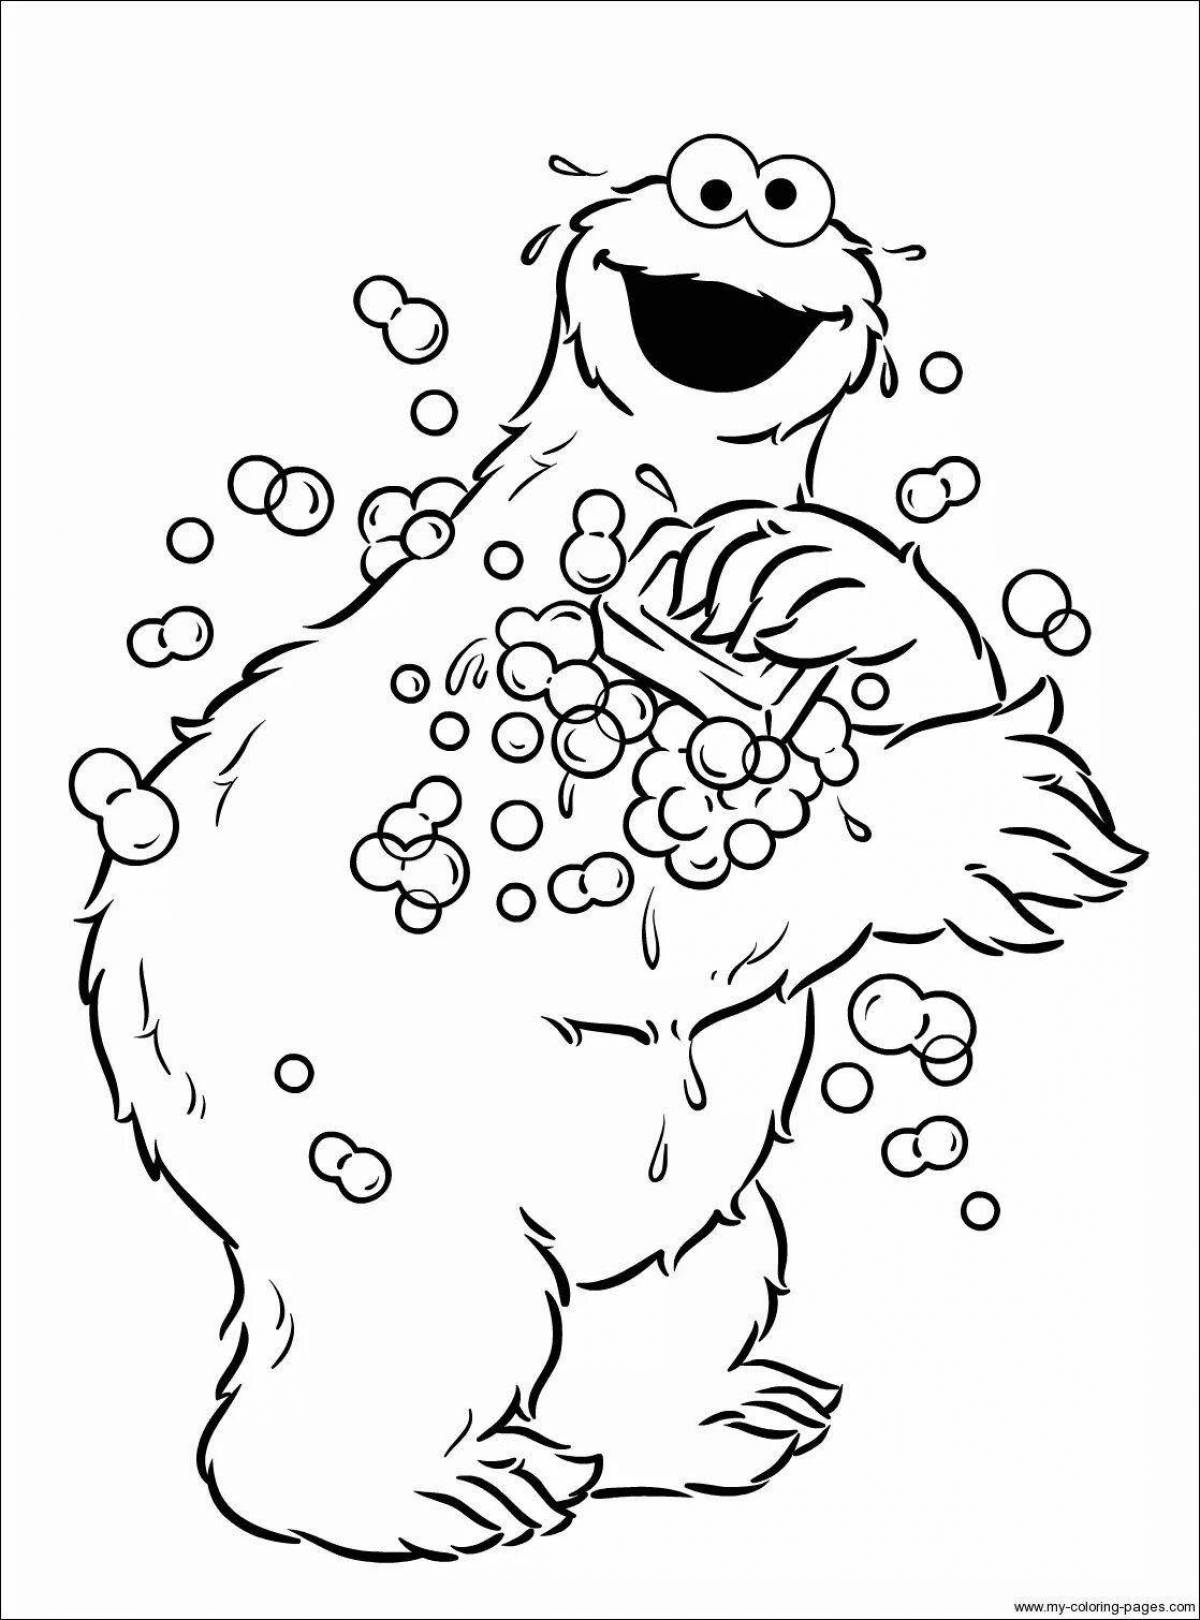 Coloring page happy musical monsters